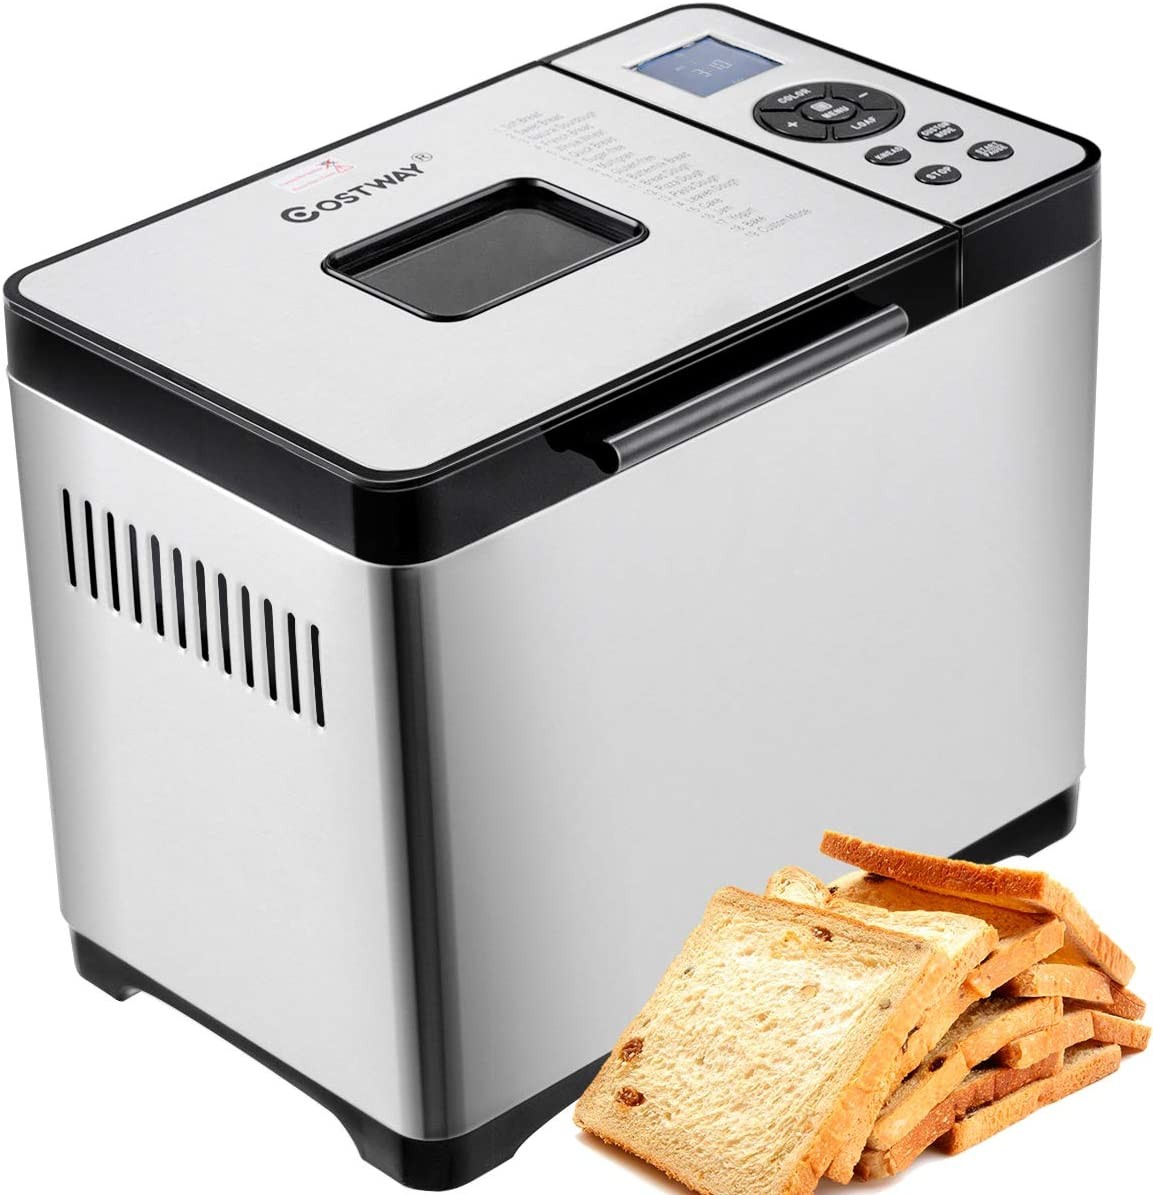 COSTWAY 2 LB Bread Maker Stainless Steel Automatic Programmable Multifunctional Bread Machine